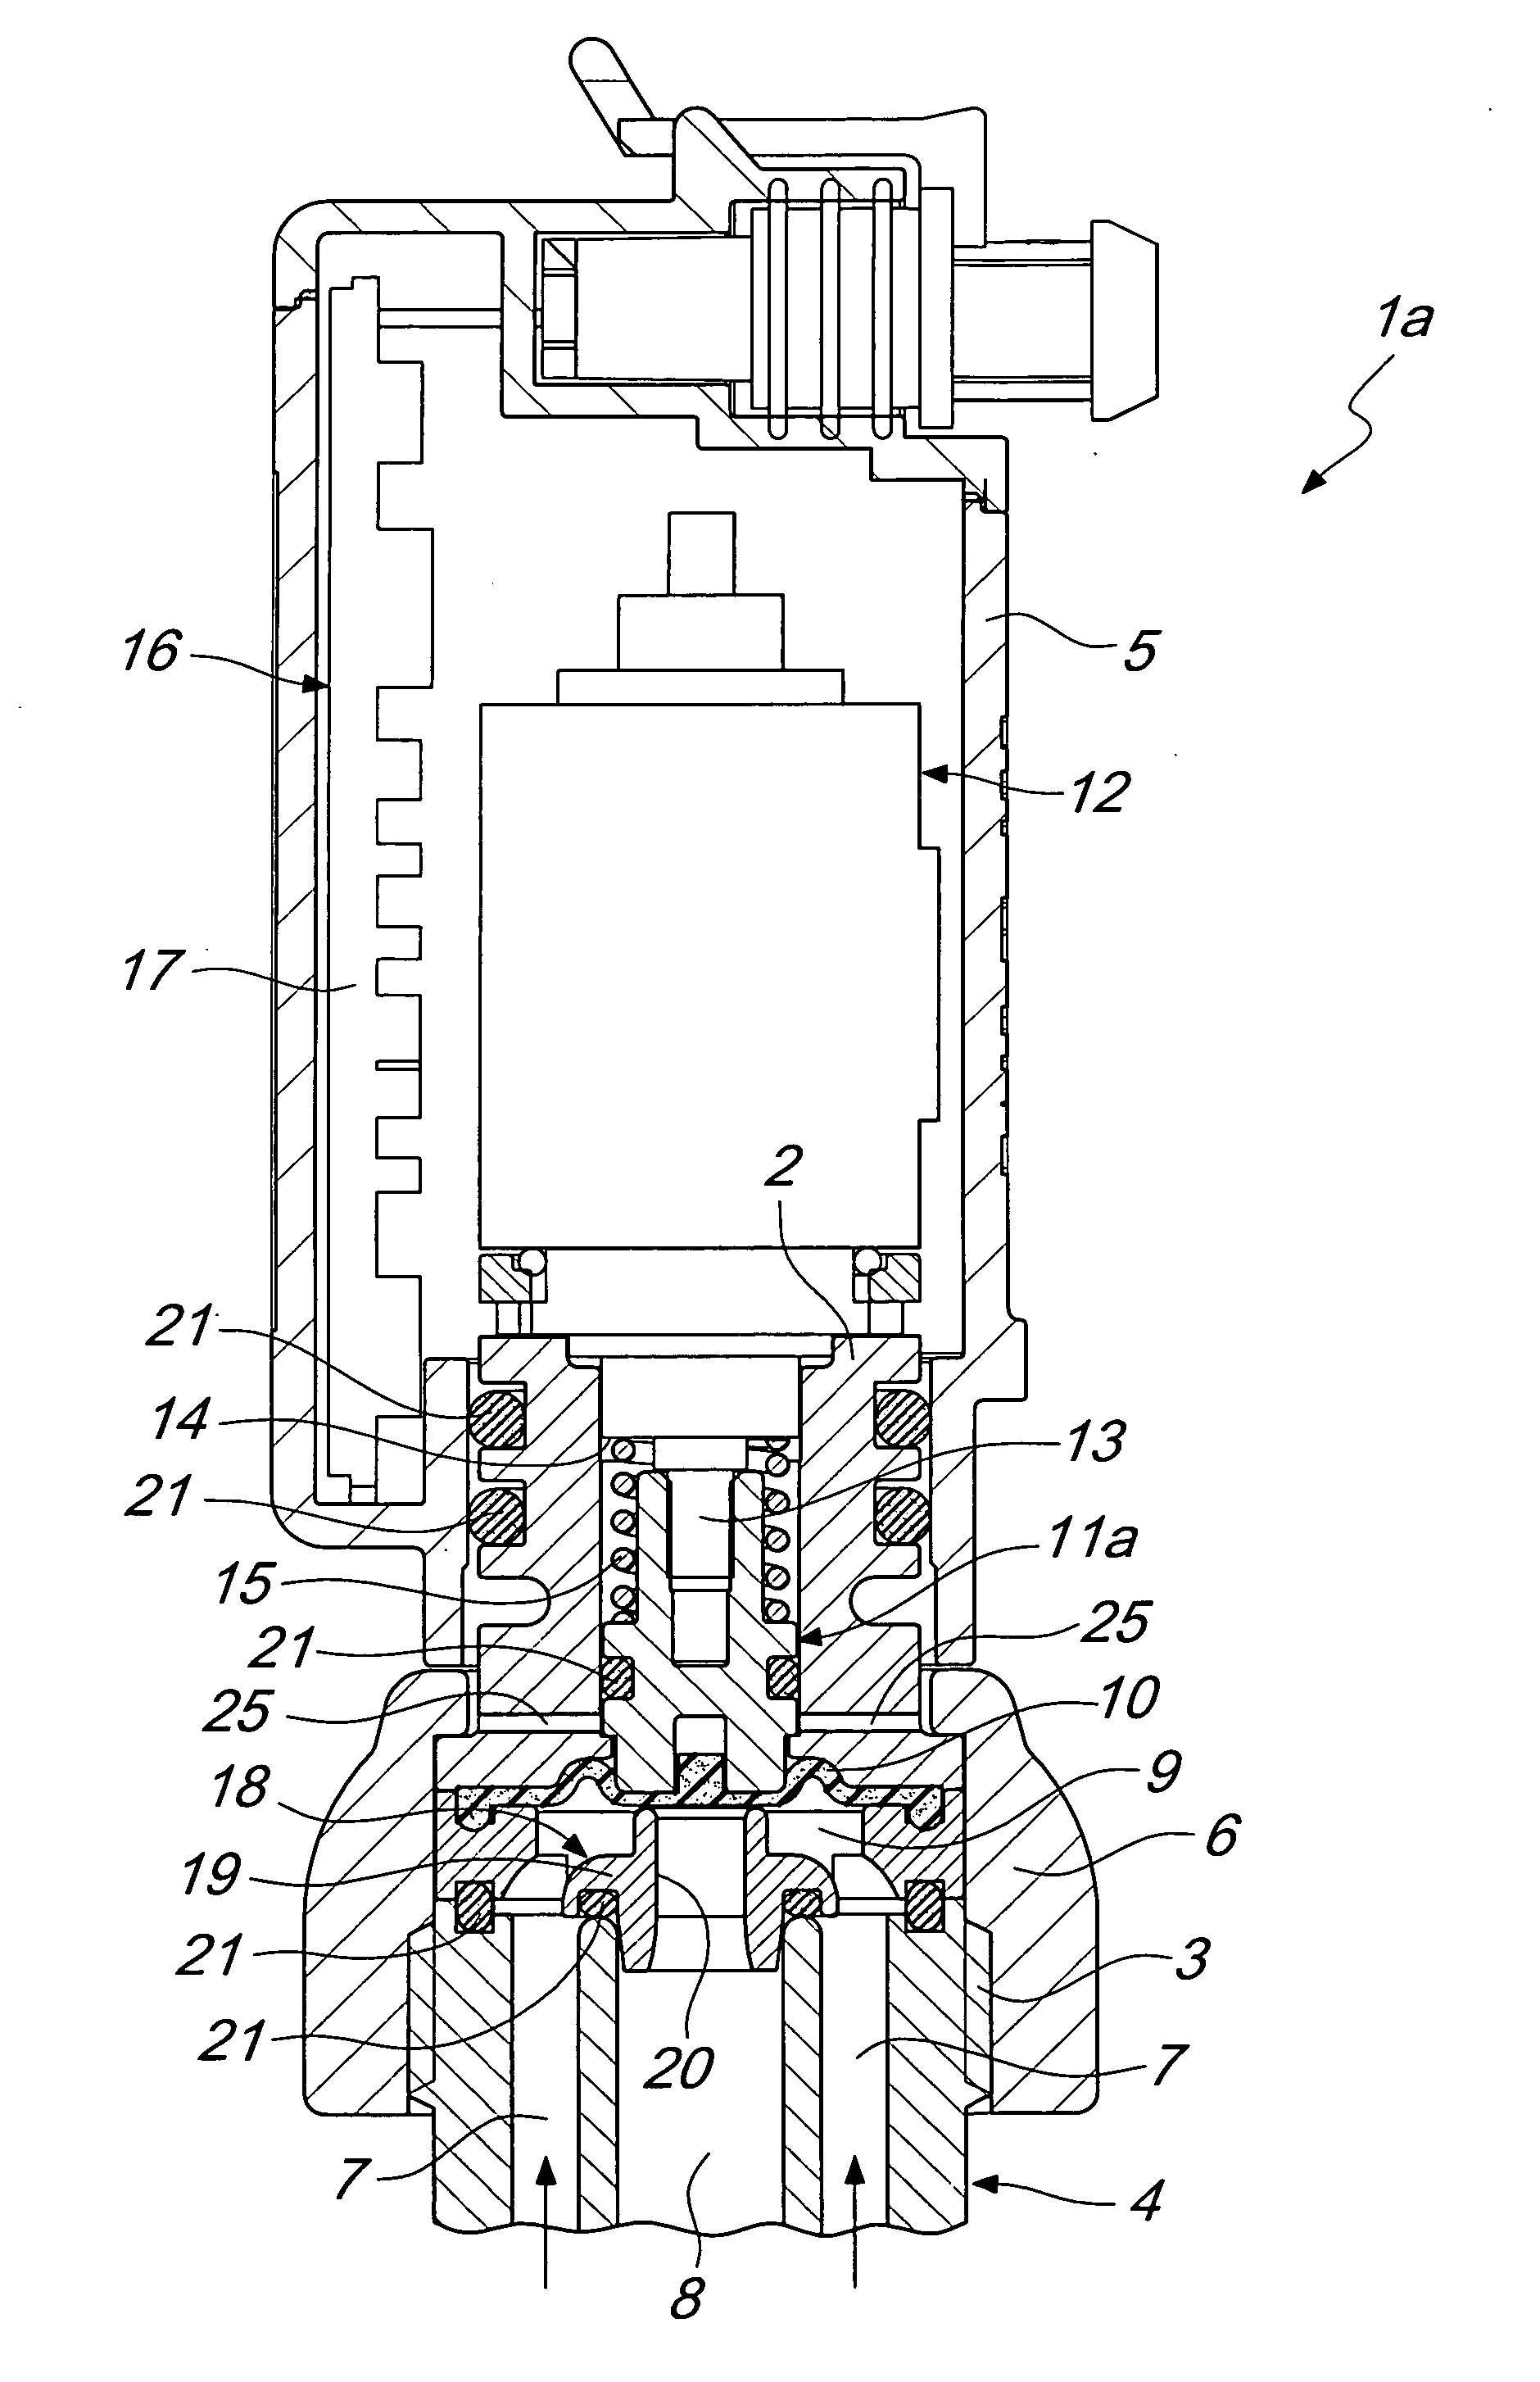 Electromechanically actuated membrane valve for branching ducts of sprinkling and/or weed control systems